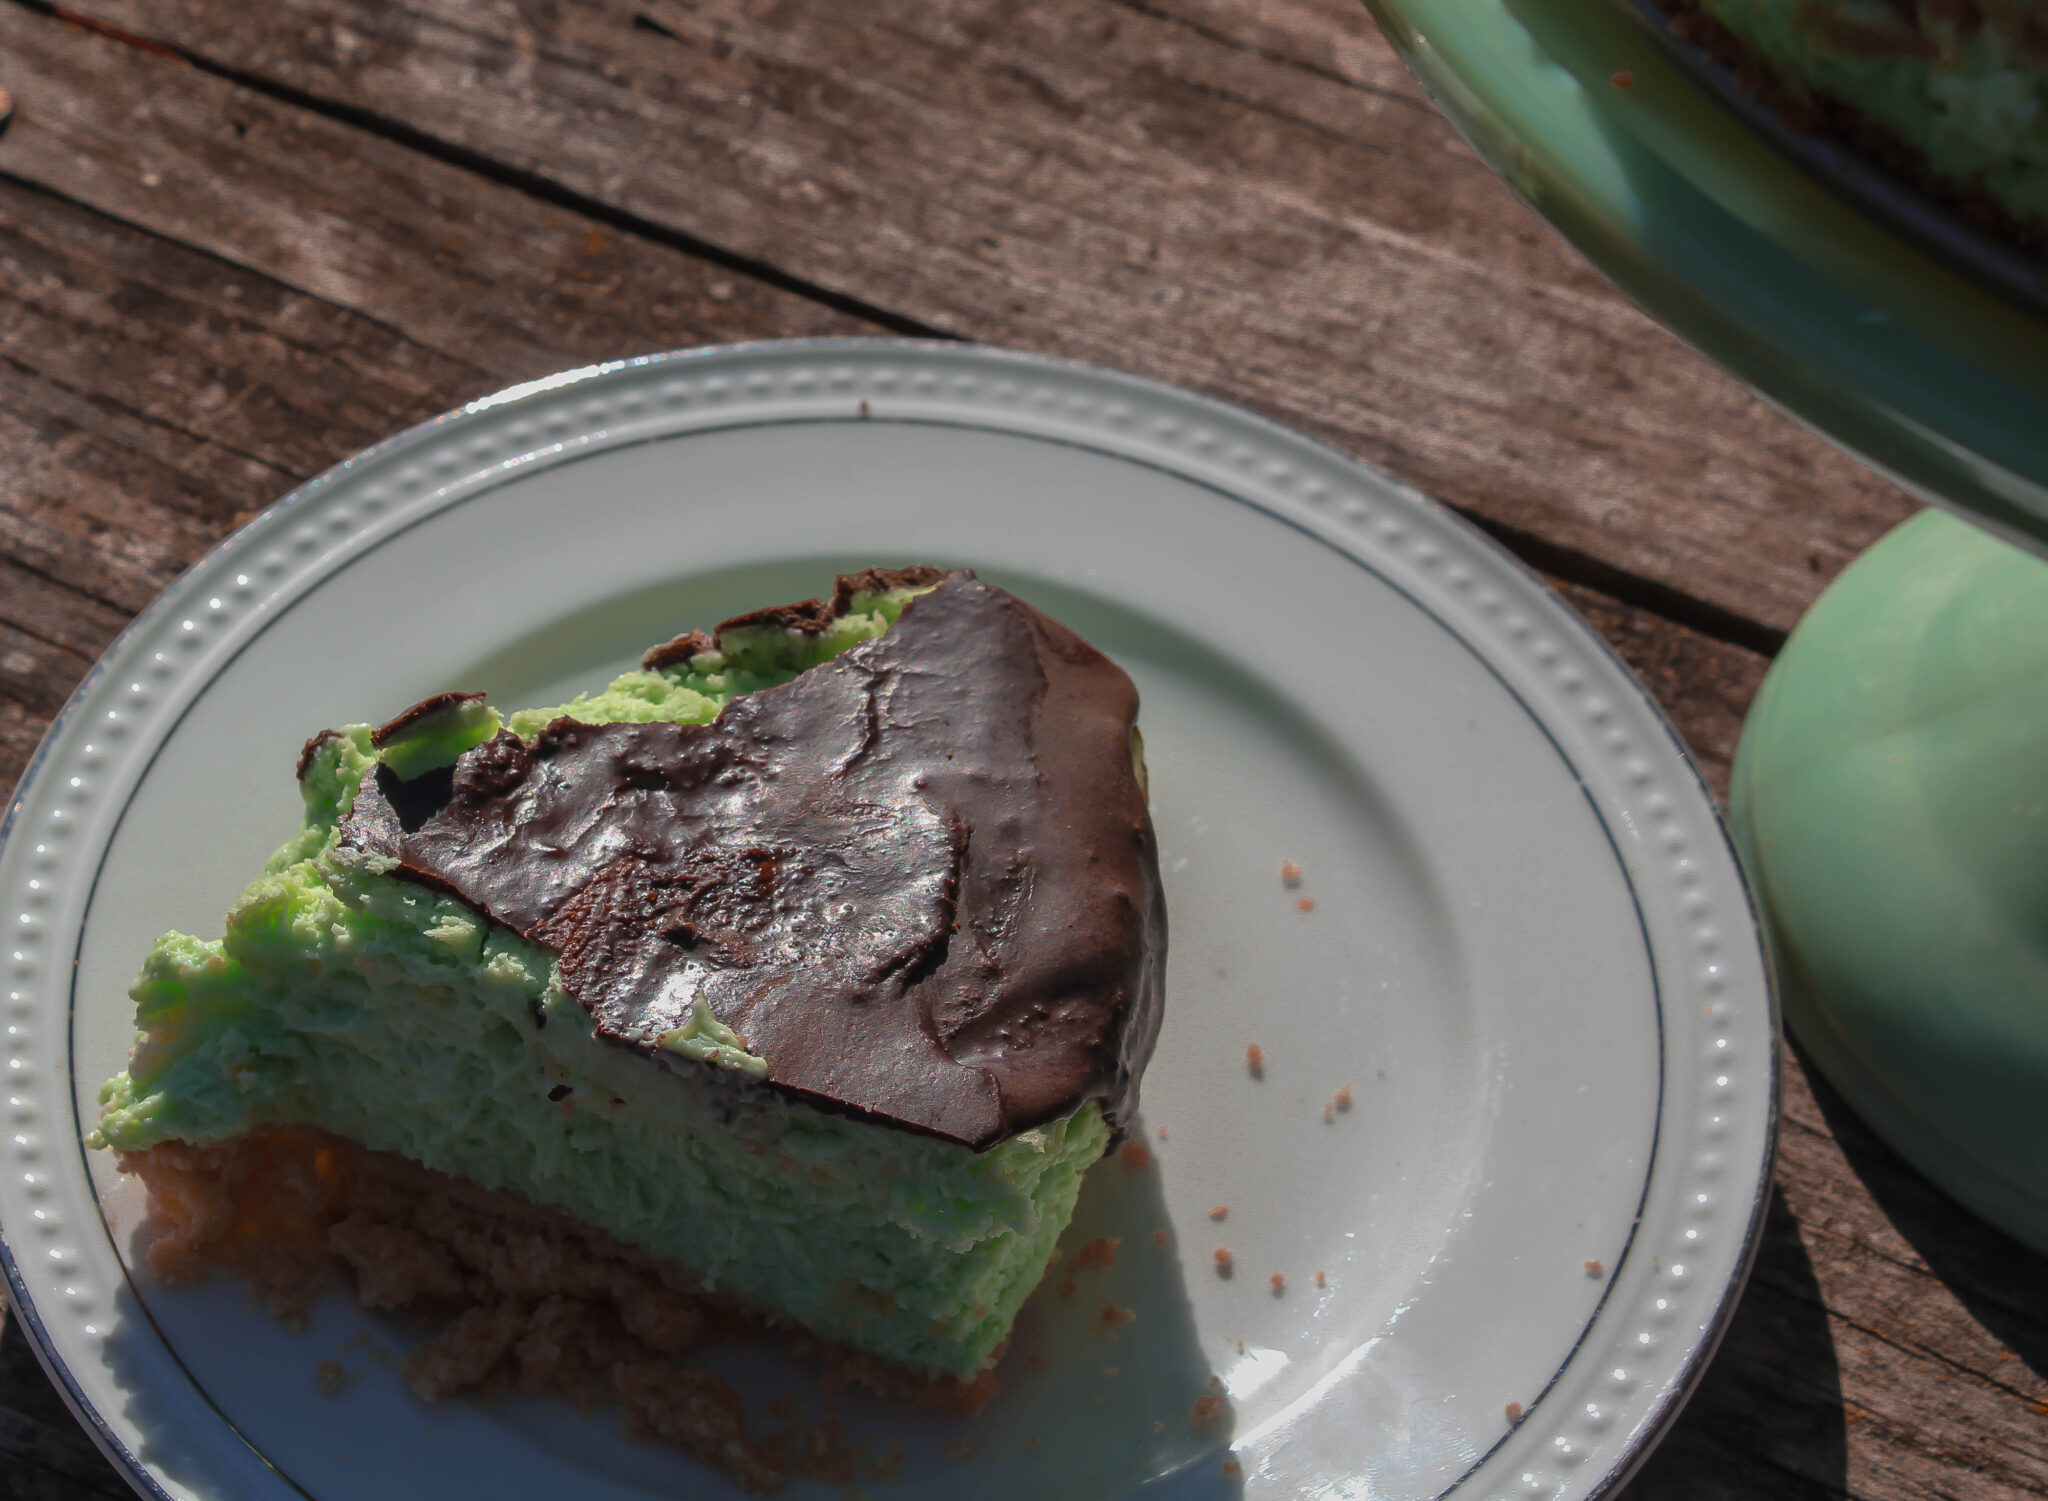 My Shamrock Cheesecake is the perfect way to celebrate St. Patrick's Day! A minty cheesecake with a delectable chocolate topping. What could be better?